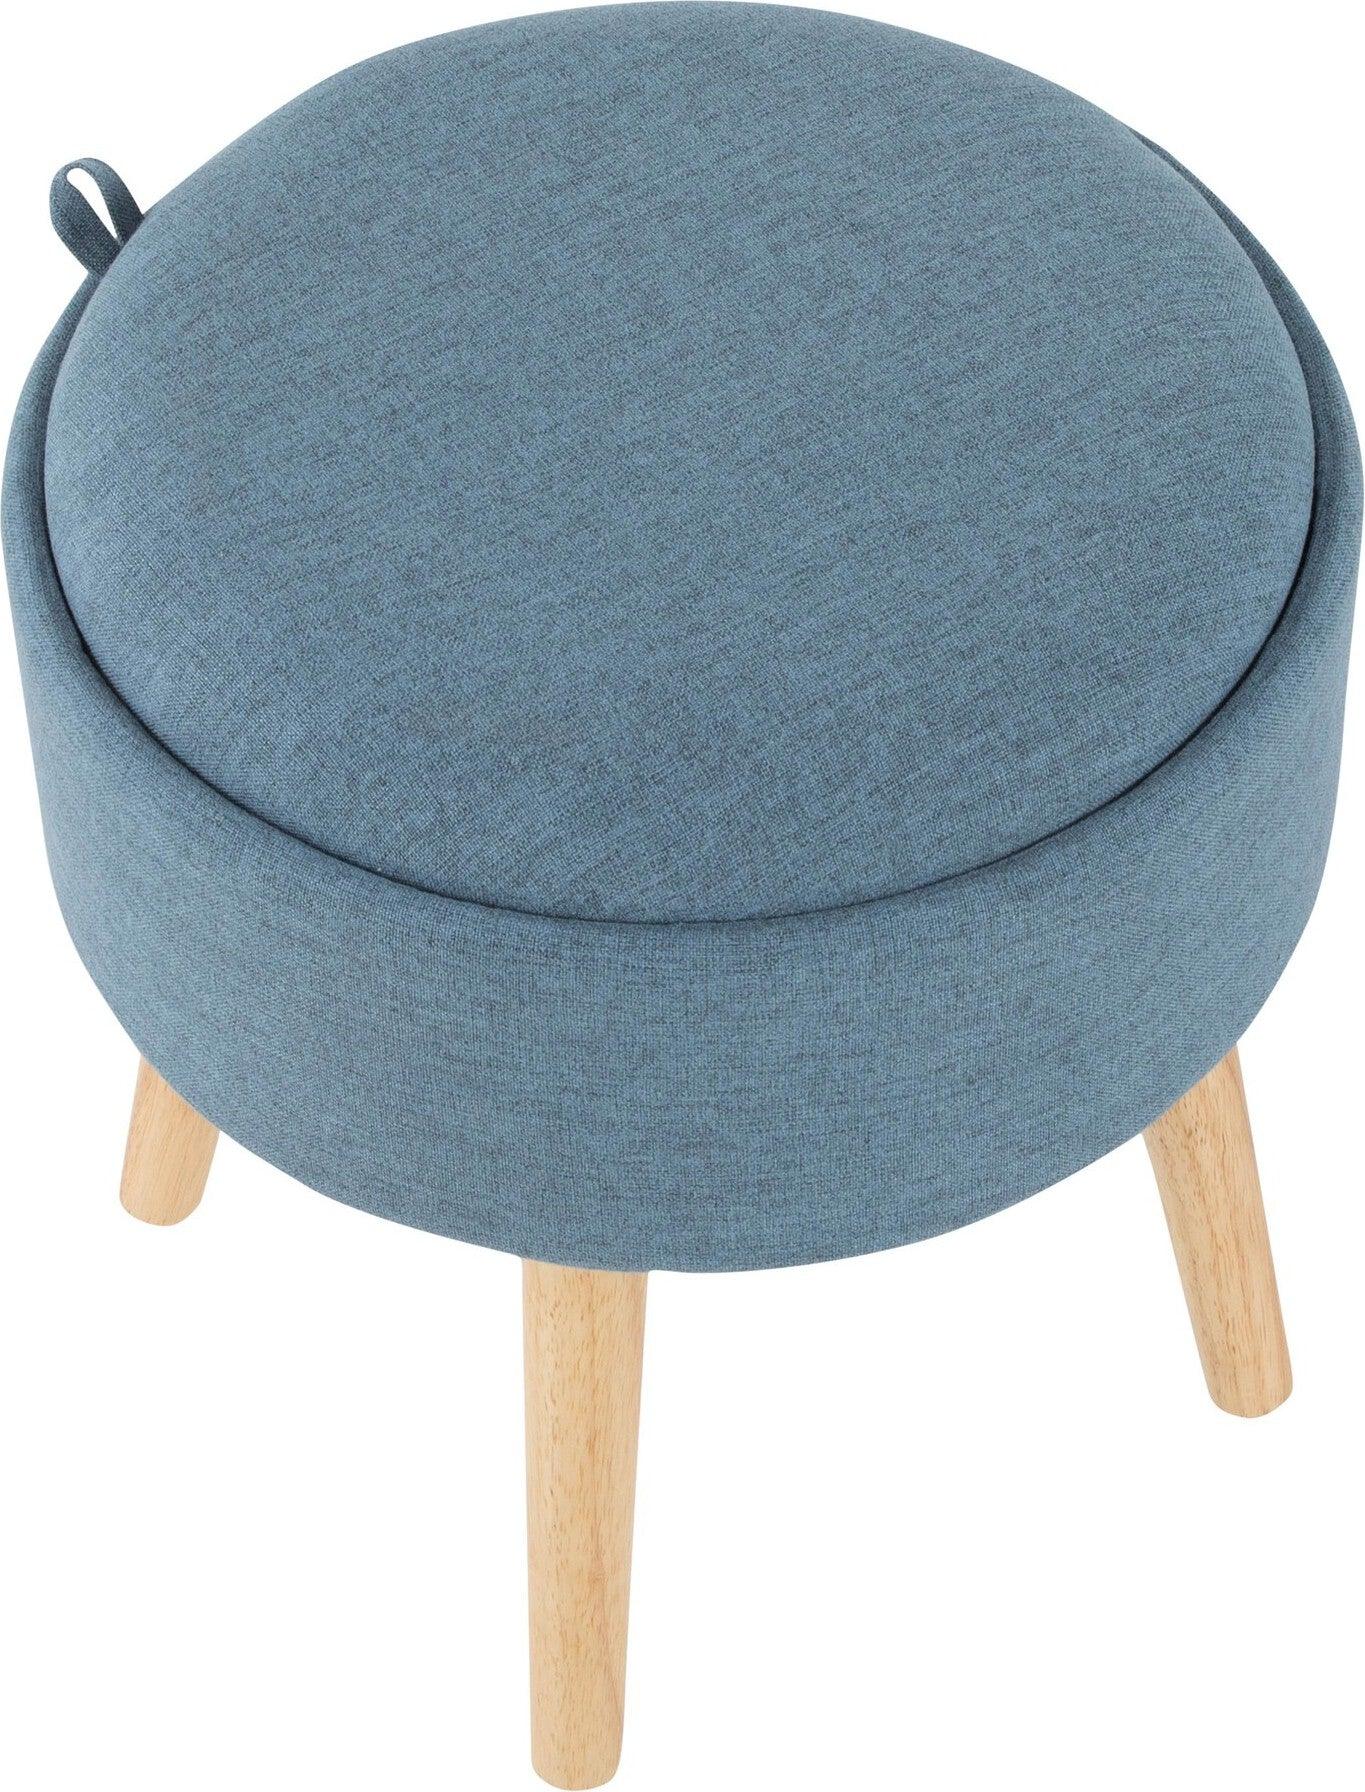 Lumisource Ottomans & Stools - Tray Contemporary Stool Natural Wood & Blue Fabric